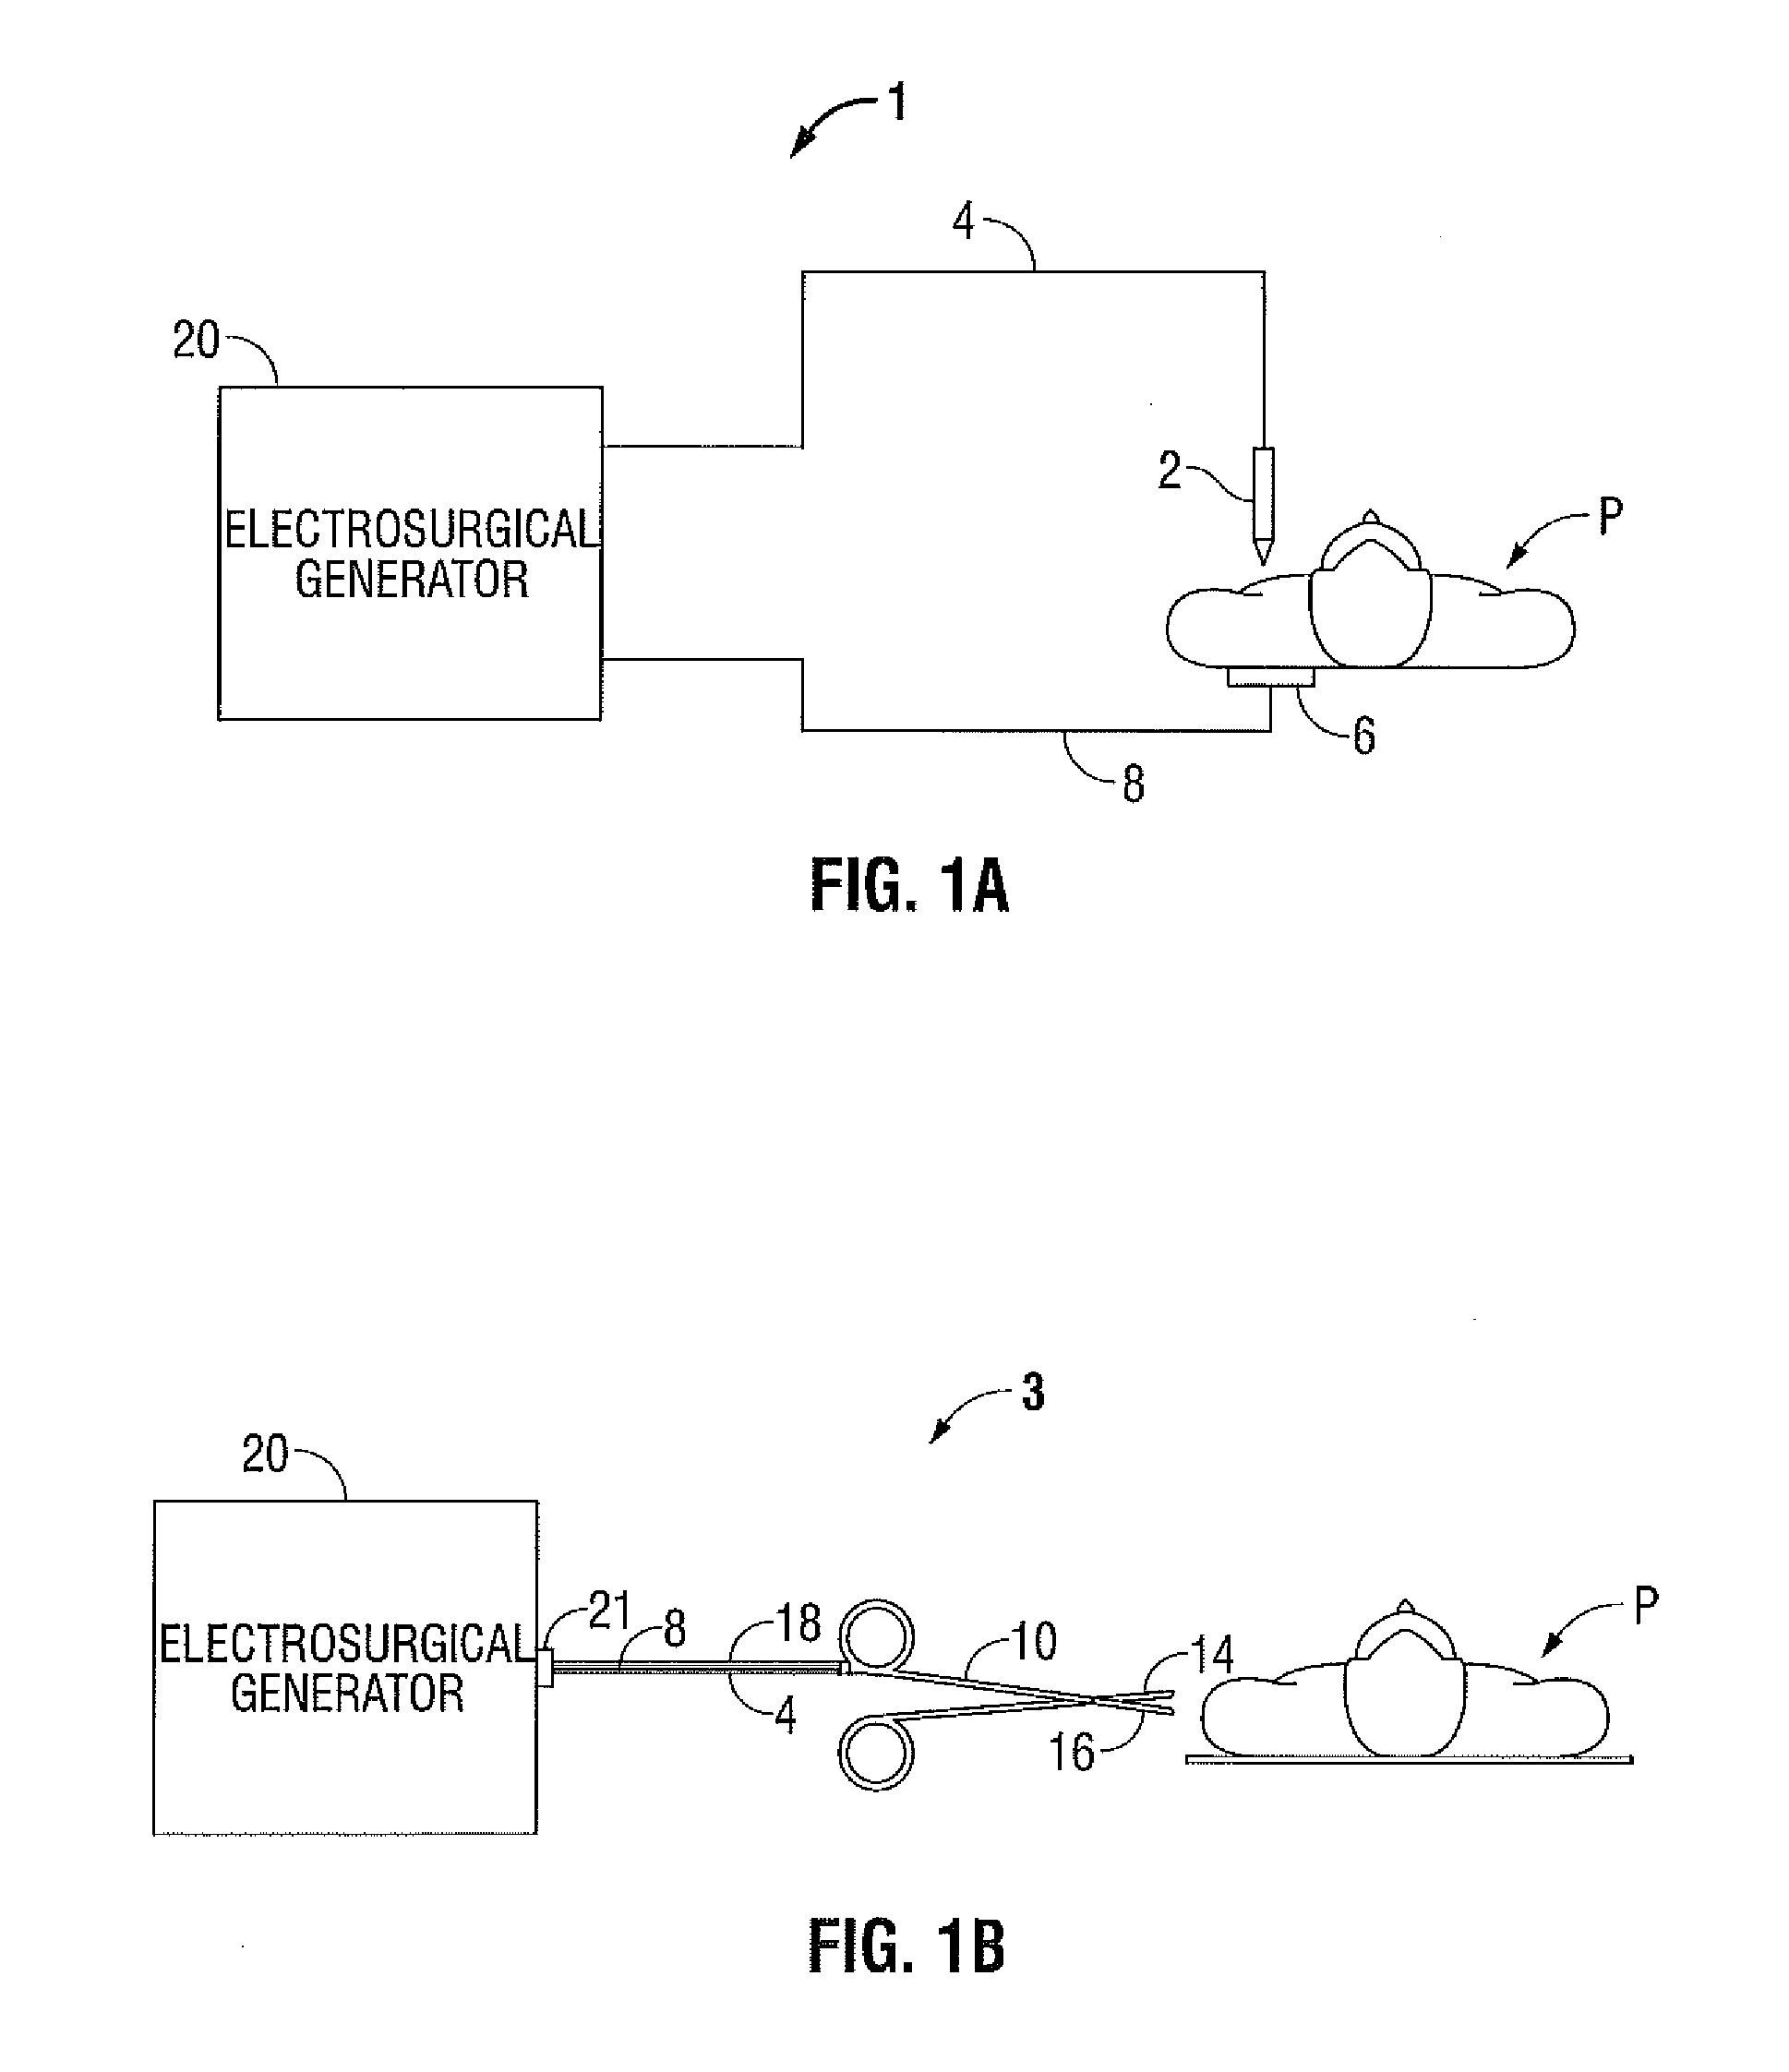 System and Method for Controlling Electrosurgical Output